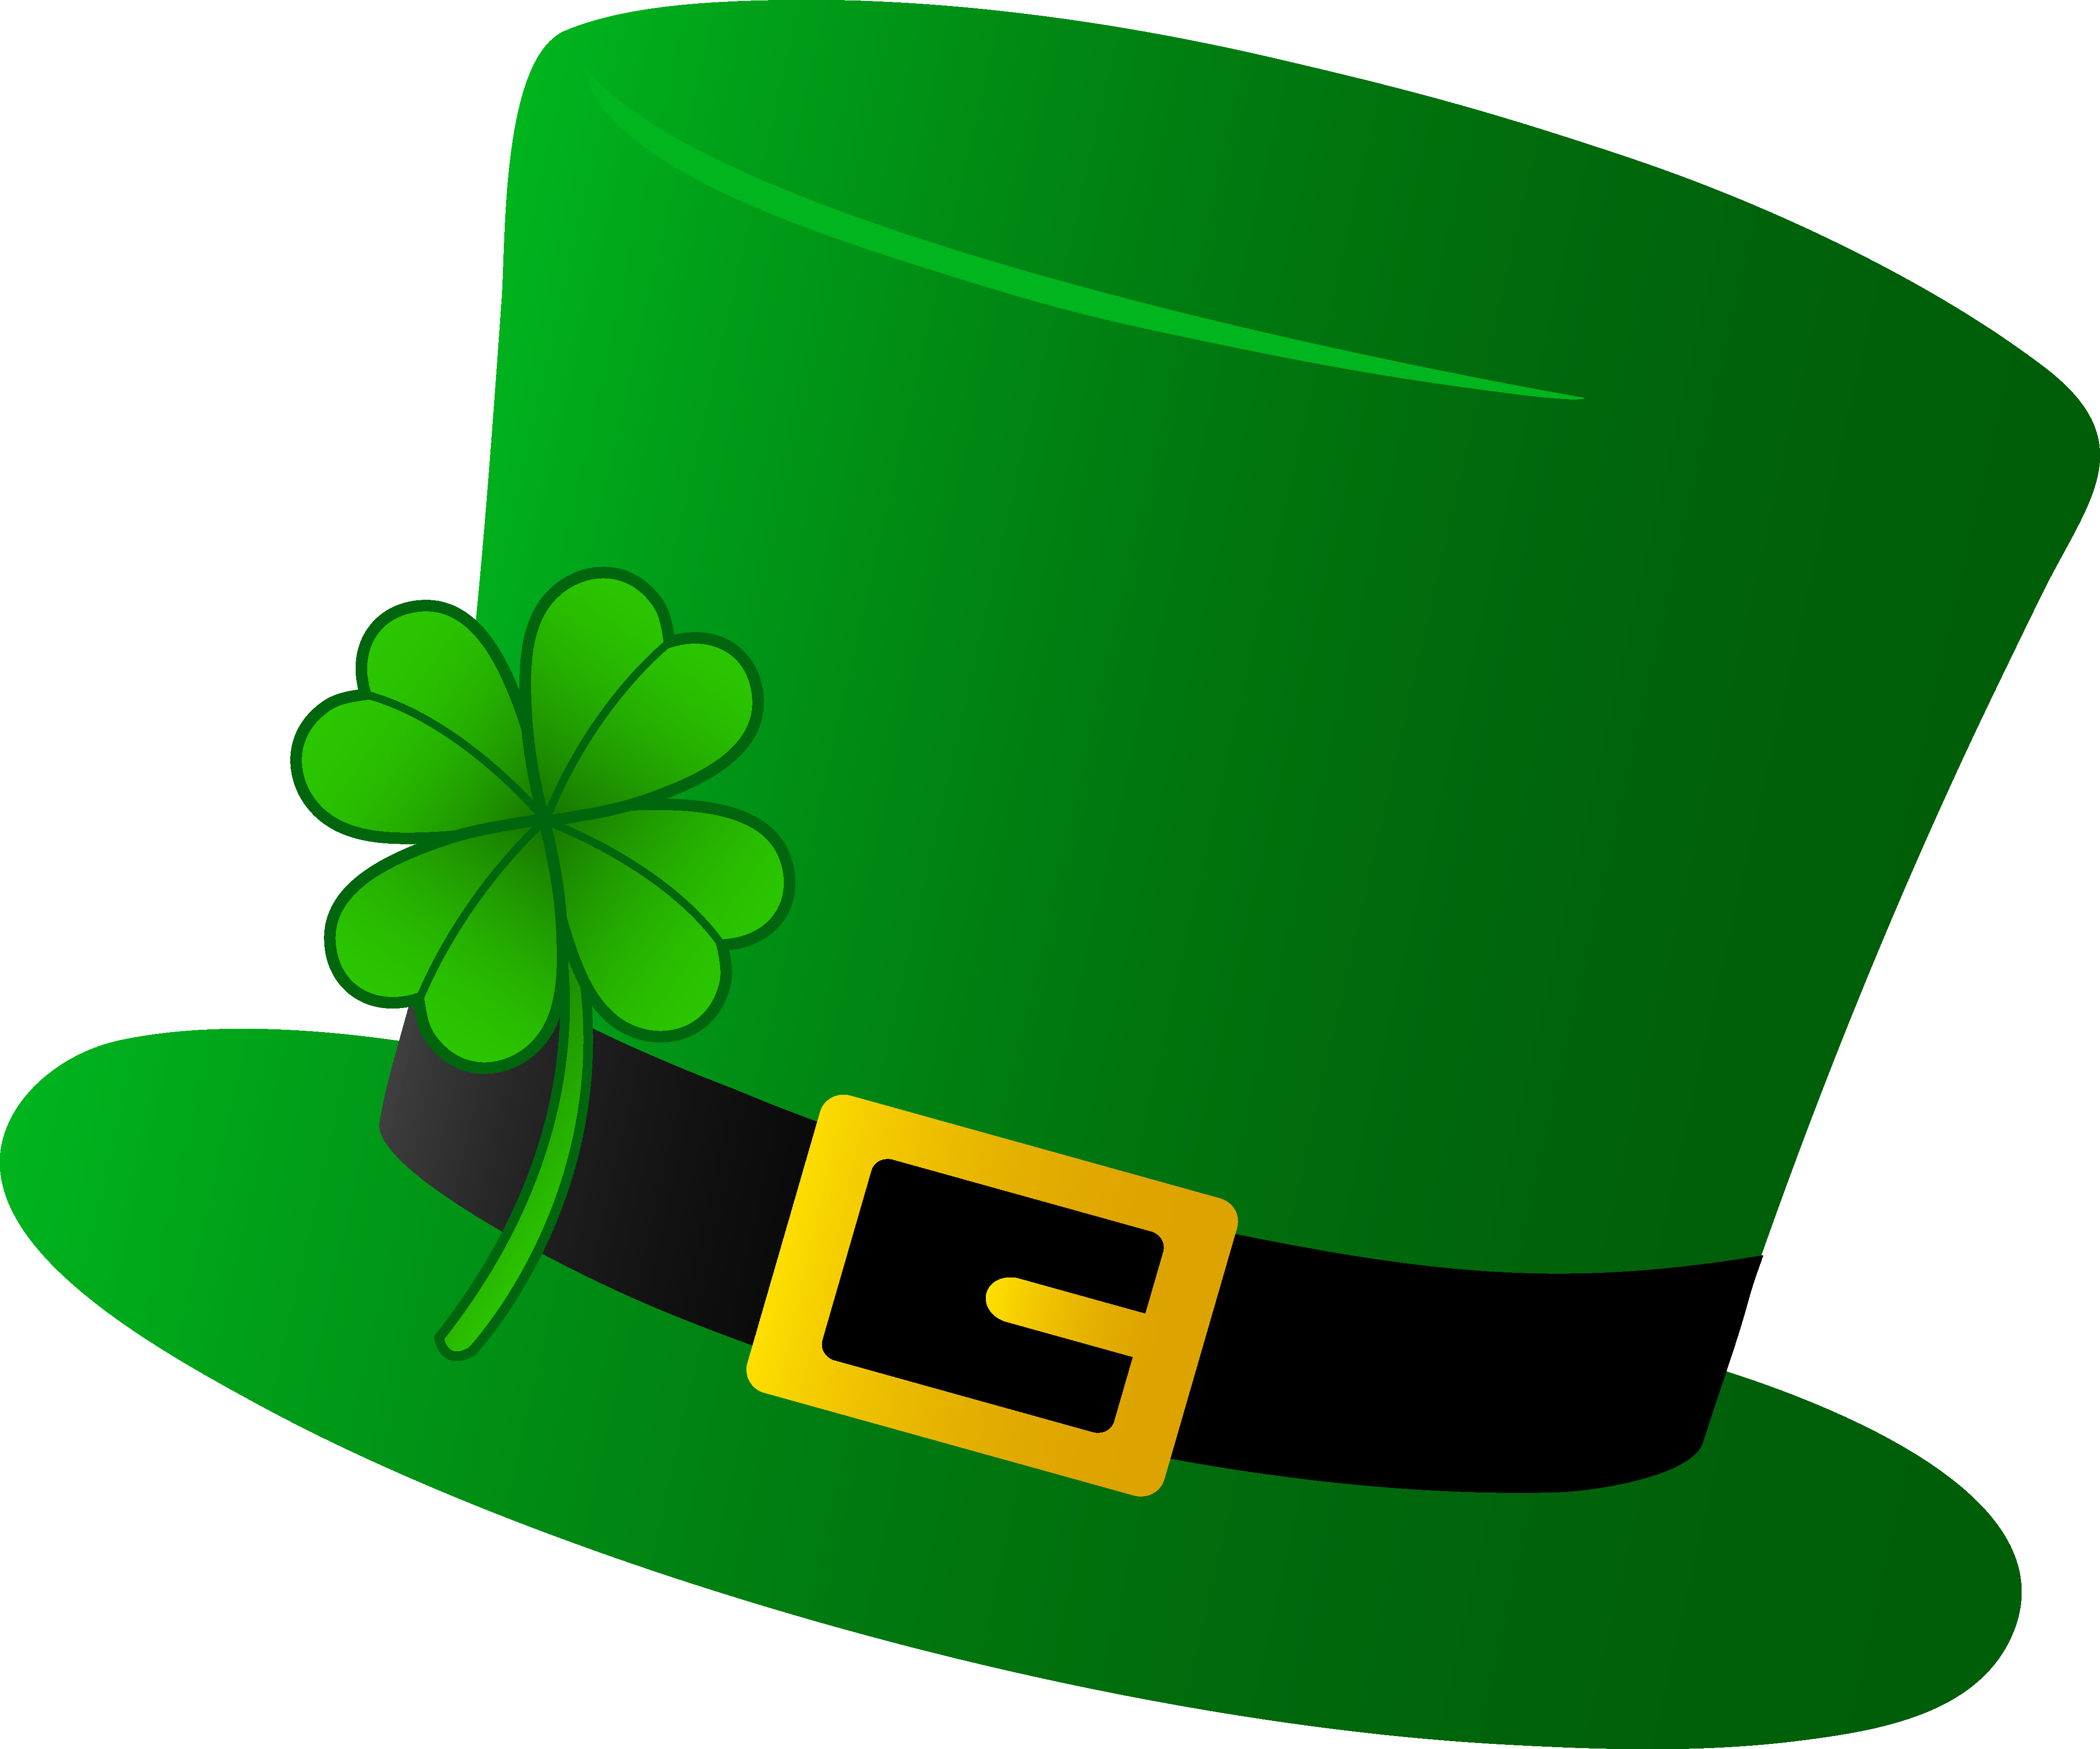 Related Clip Art. St patricks day ...